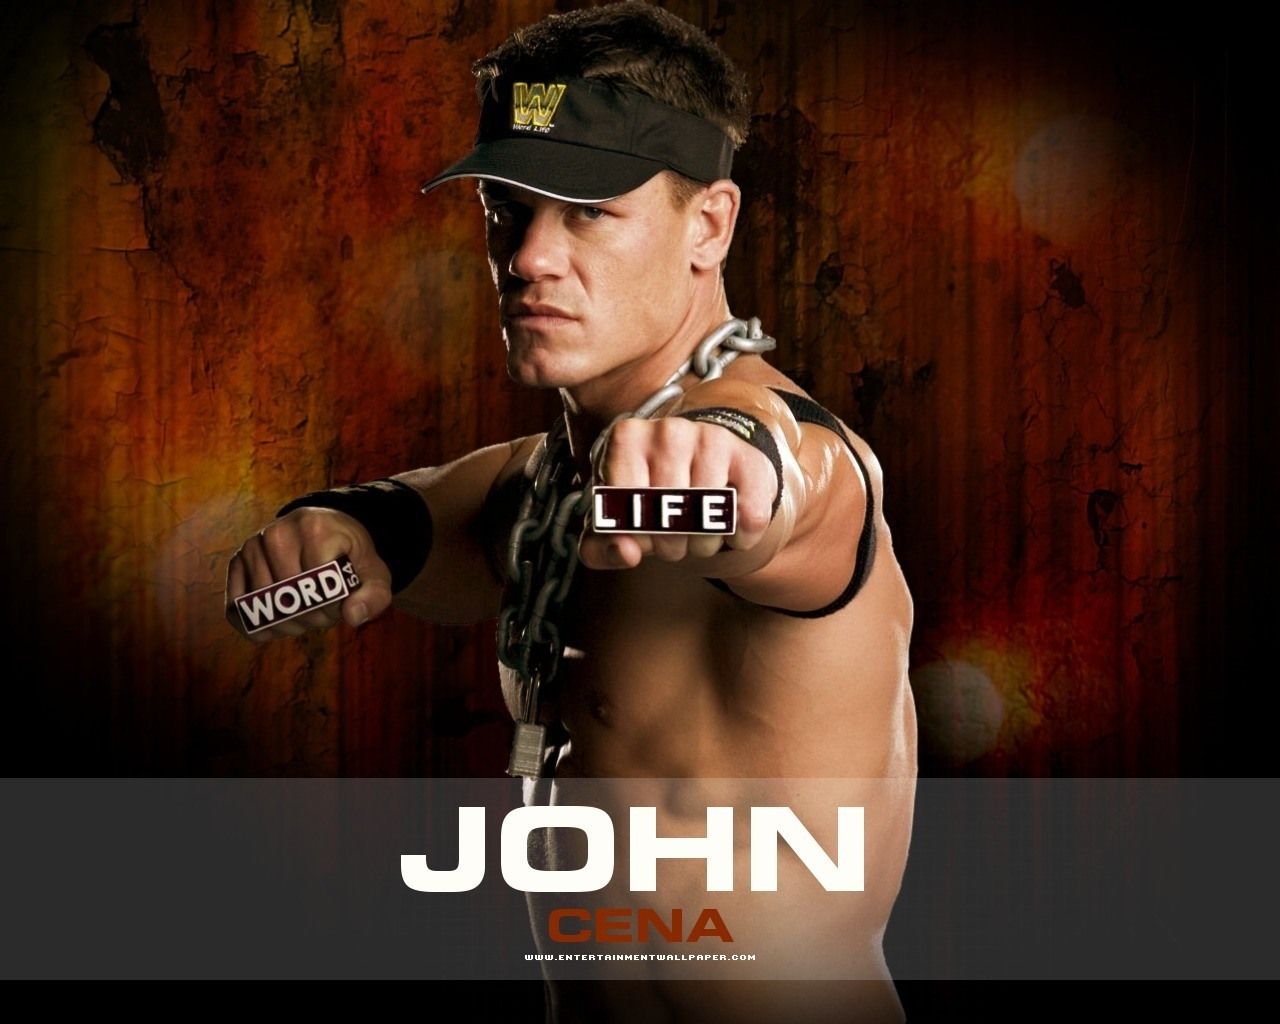 John Cena Wallpaper john cena John cena John cena pictures